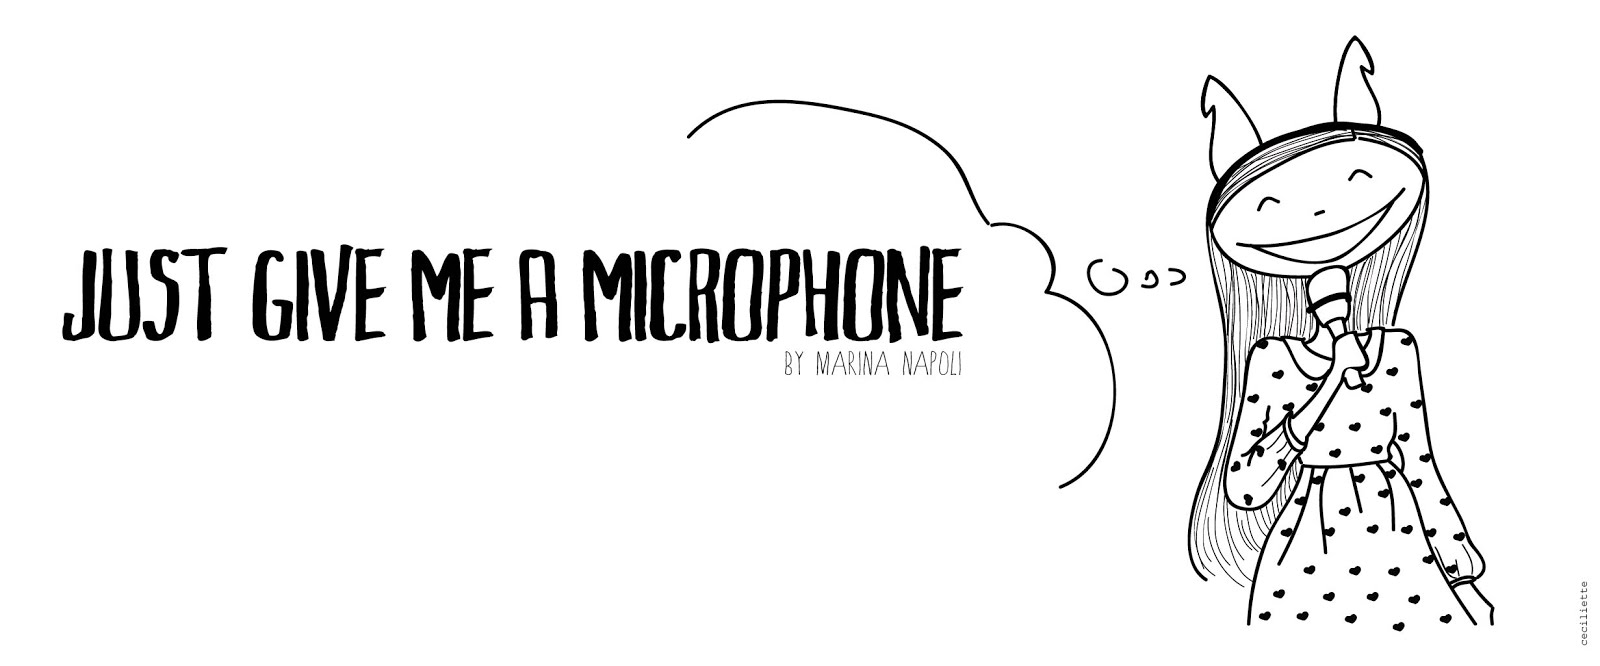 JUST GIVE ME A MICROPHONE!!!